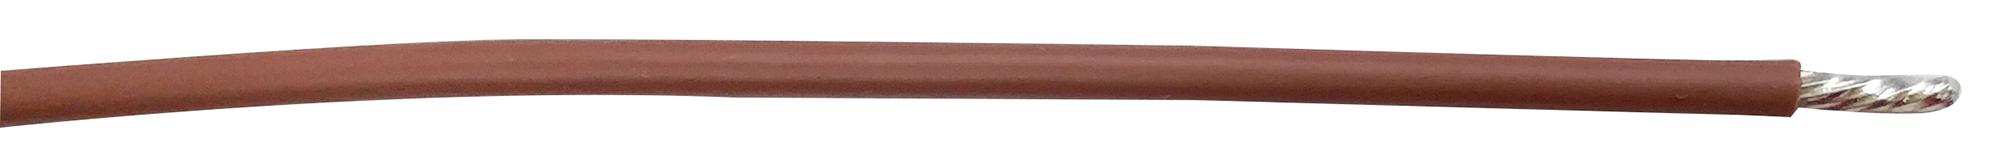 PP002534 CABLE WIRE, 22AWG, BROWN, 305M PRO POWER